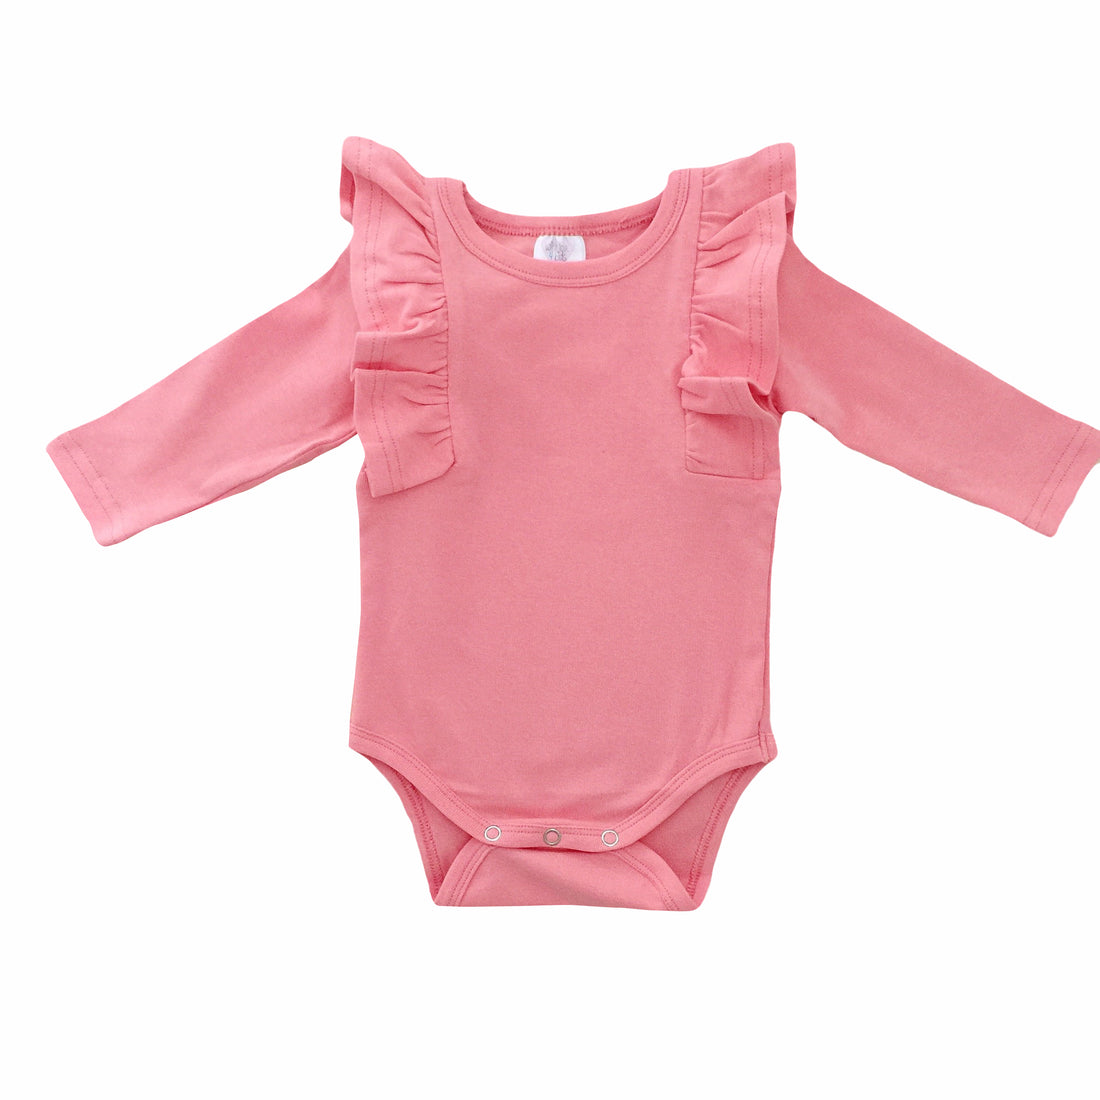 Shimmy Long Sleeve Onesie/Top - CORAL